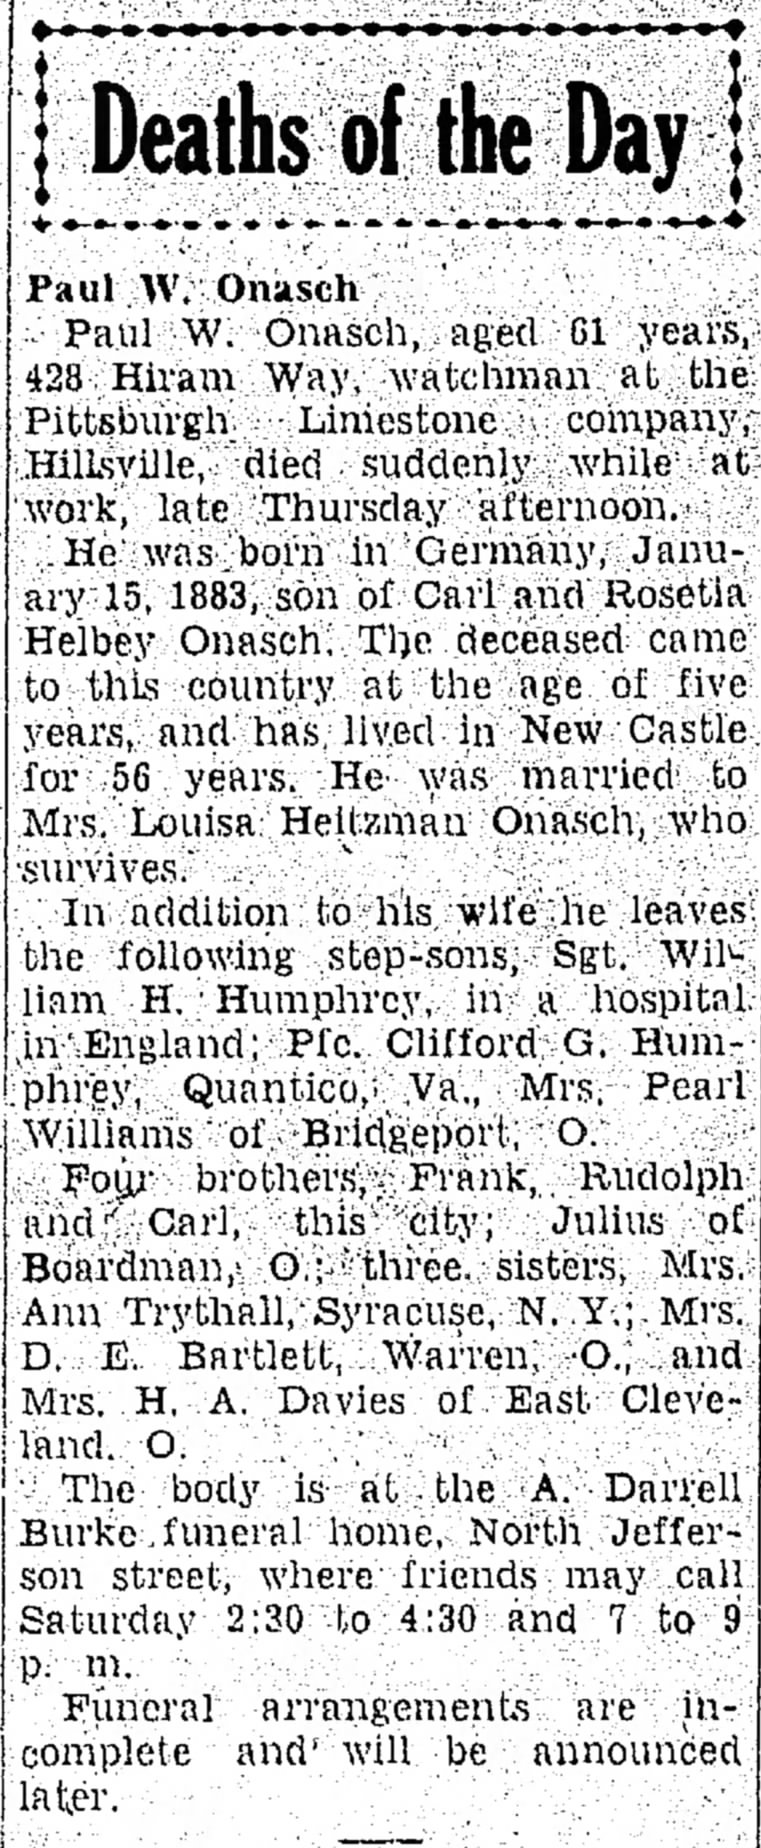 New Castle News, 8 Dec 1944, Friday, page 2